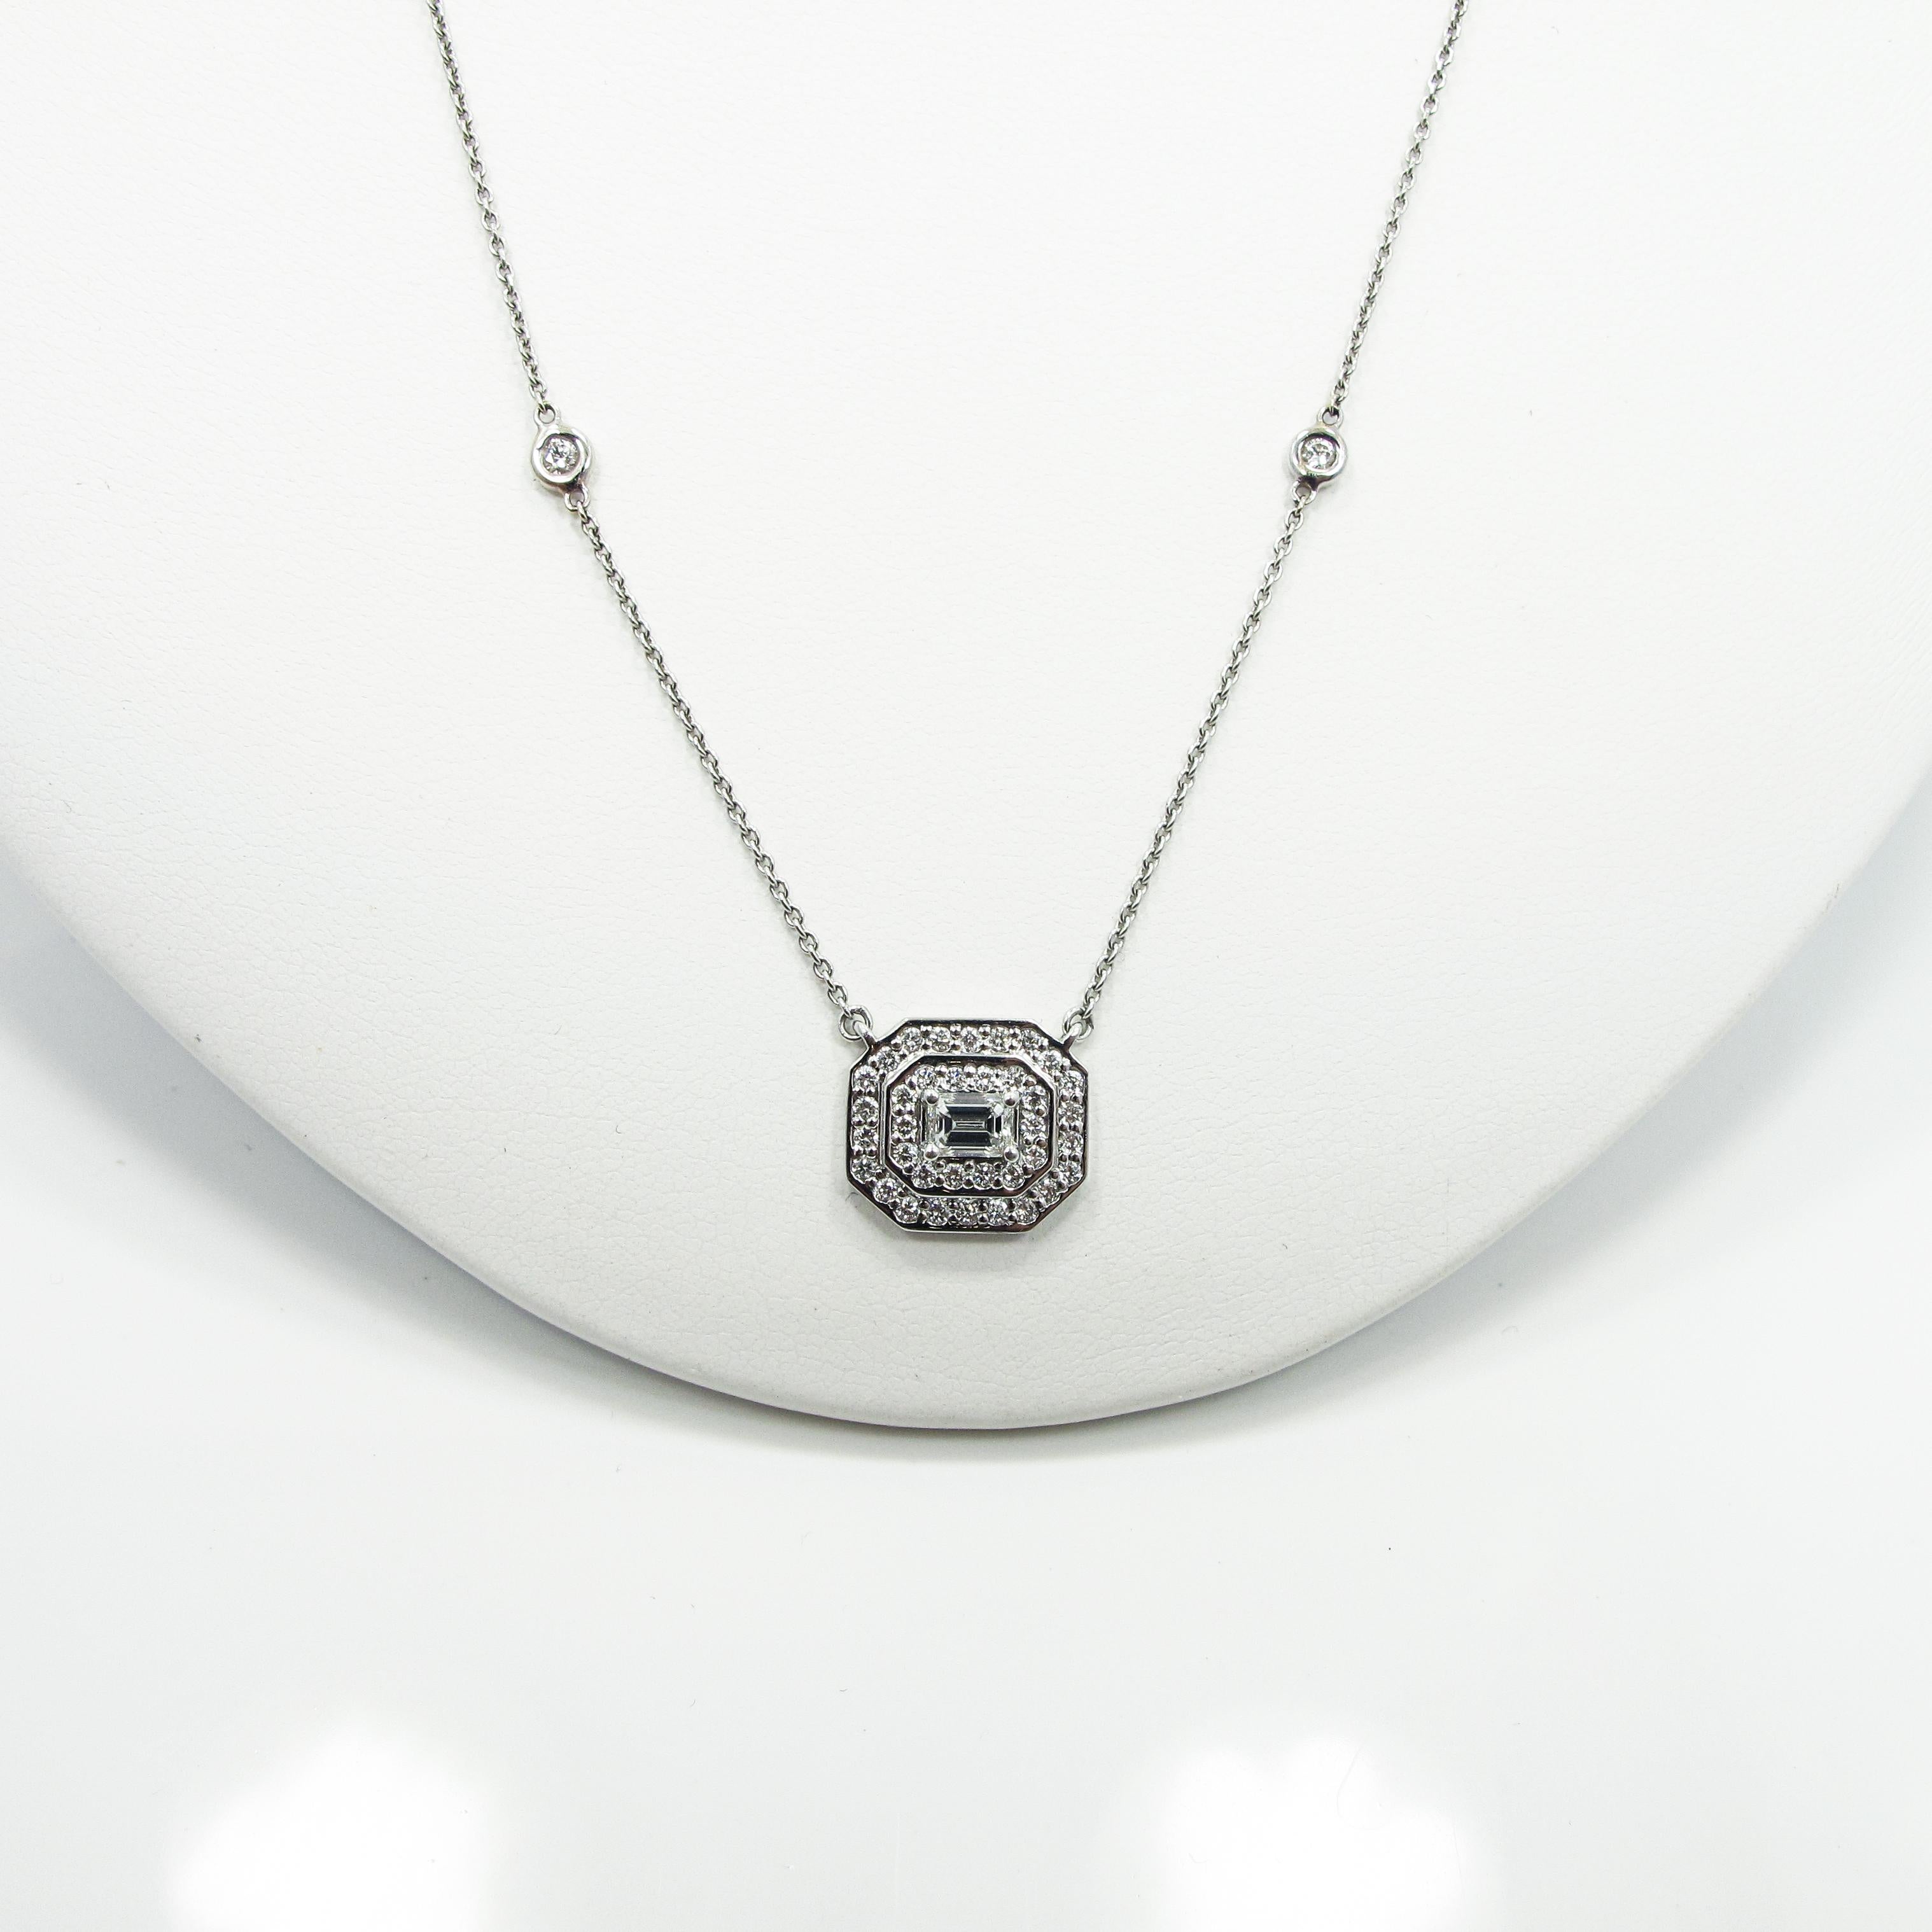 This emerald shape mosaic piece features an emerald cut center diamond (0.34ct F VS1) and is surrounded by a two tier halo with 40 round diamonds (0.35ct approx. F/G VS/SI) set in 14k white gold. The piece is suspended from a 17